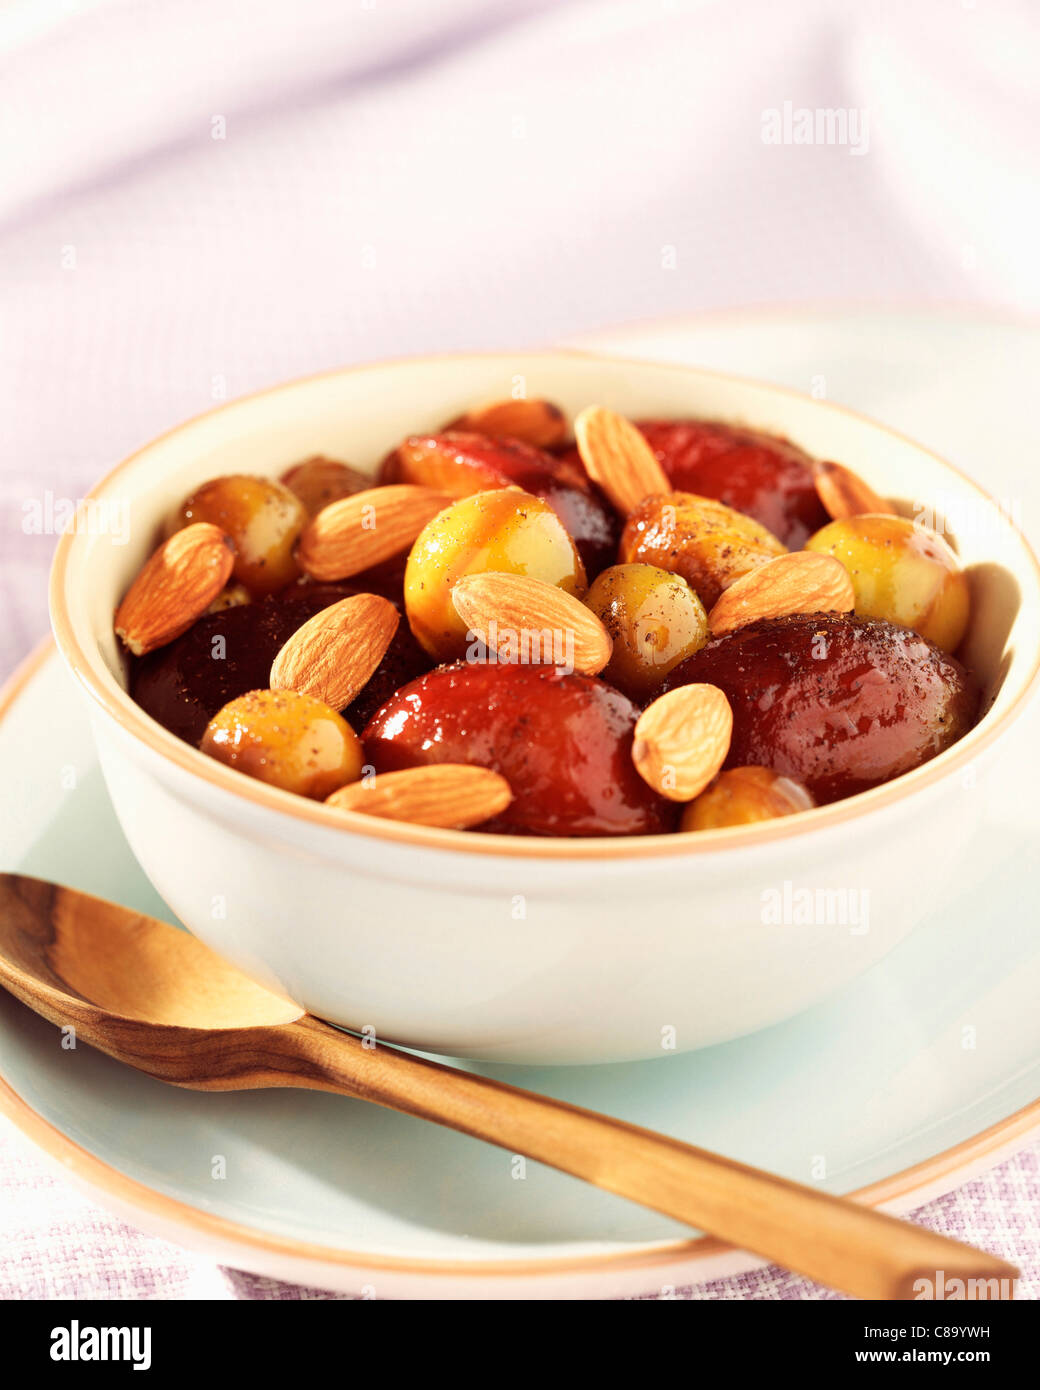 Mirabelle and quetsch plums with orange blossom and grilled almonds Stock Photo